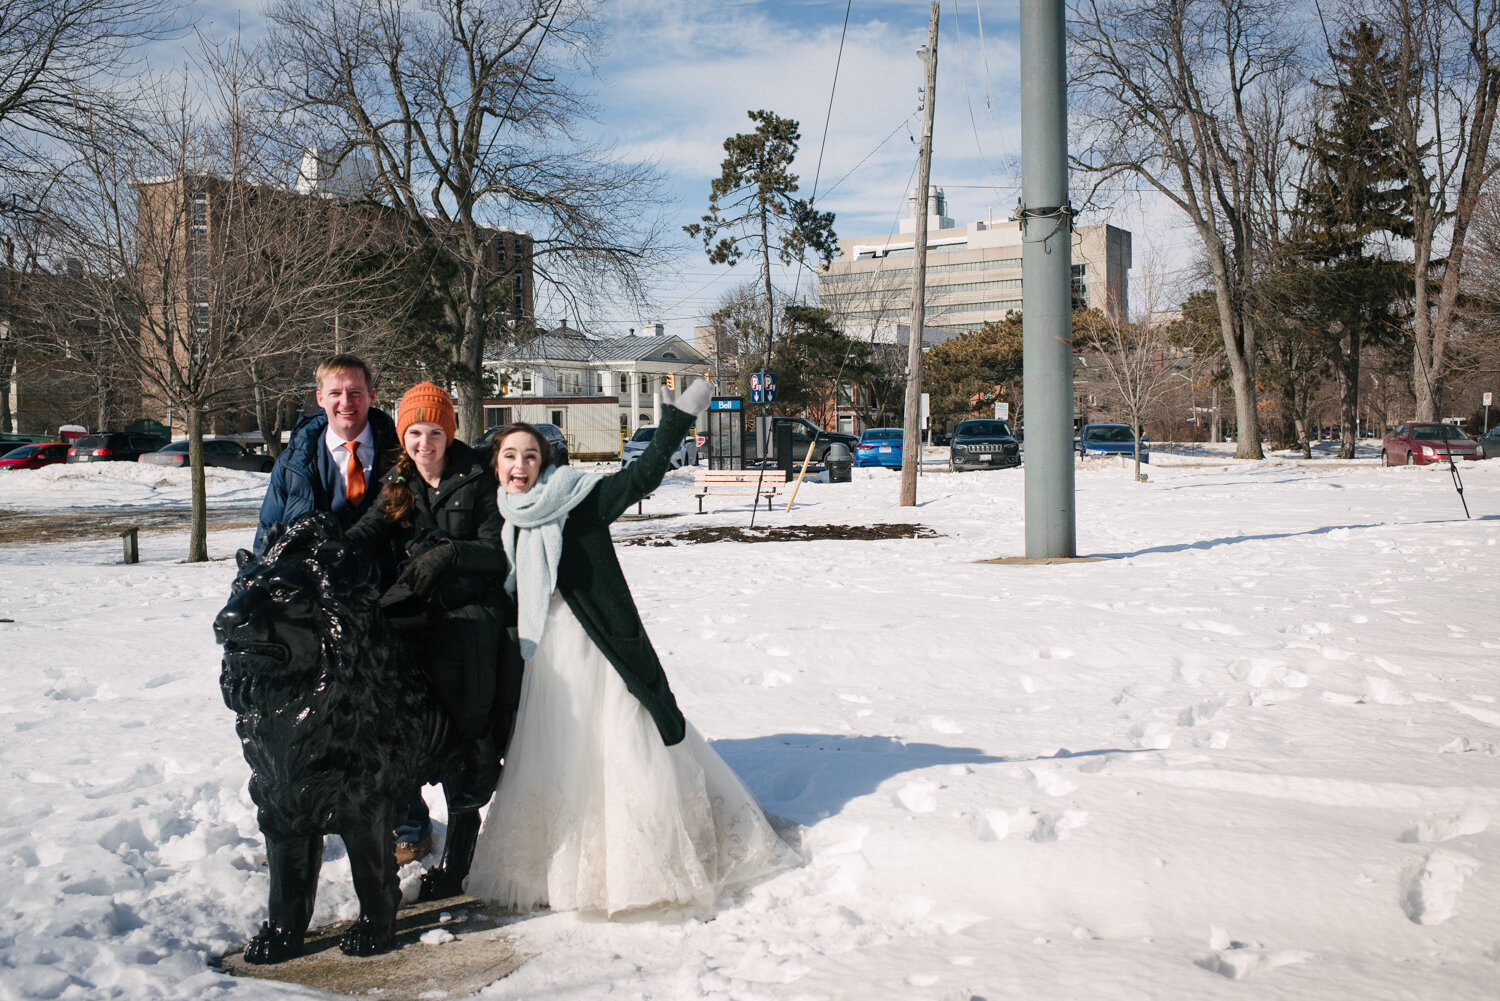  I fell in love with Sara and Iain’s winter wedding! It was my first Canadian winter photoshoot and it was epic! 